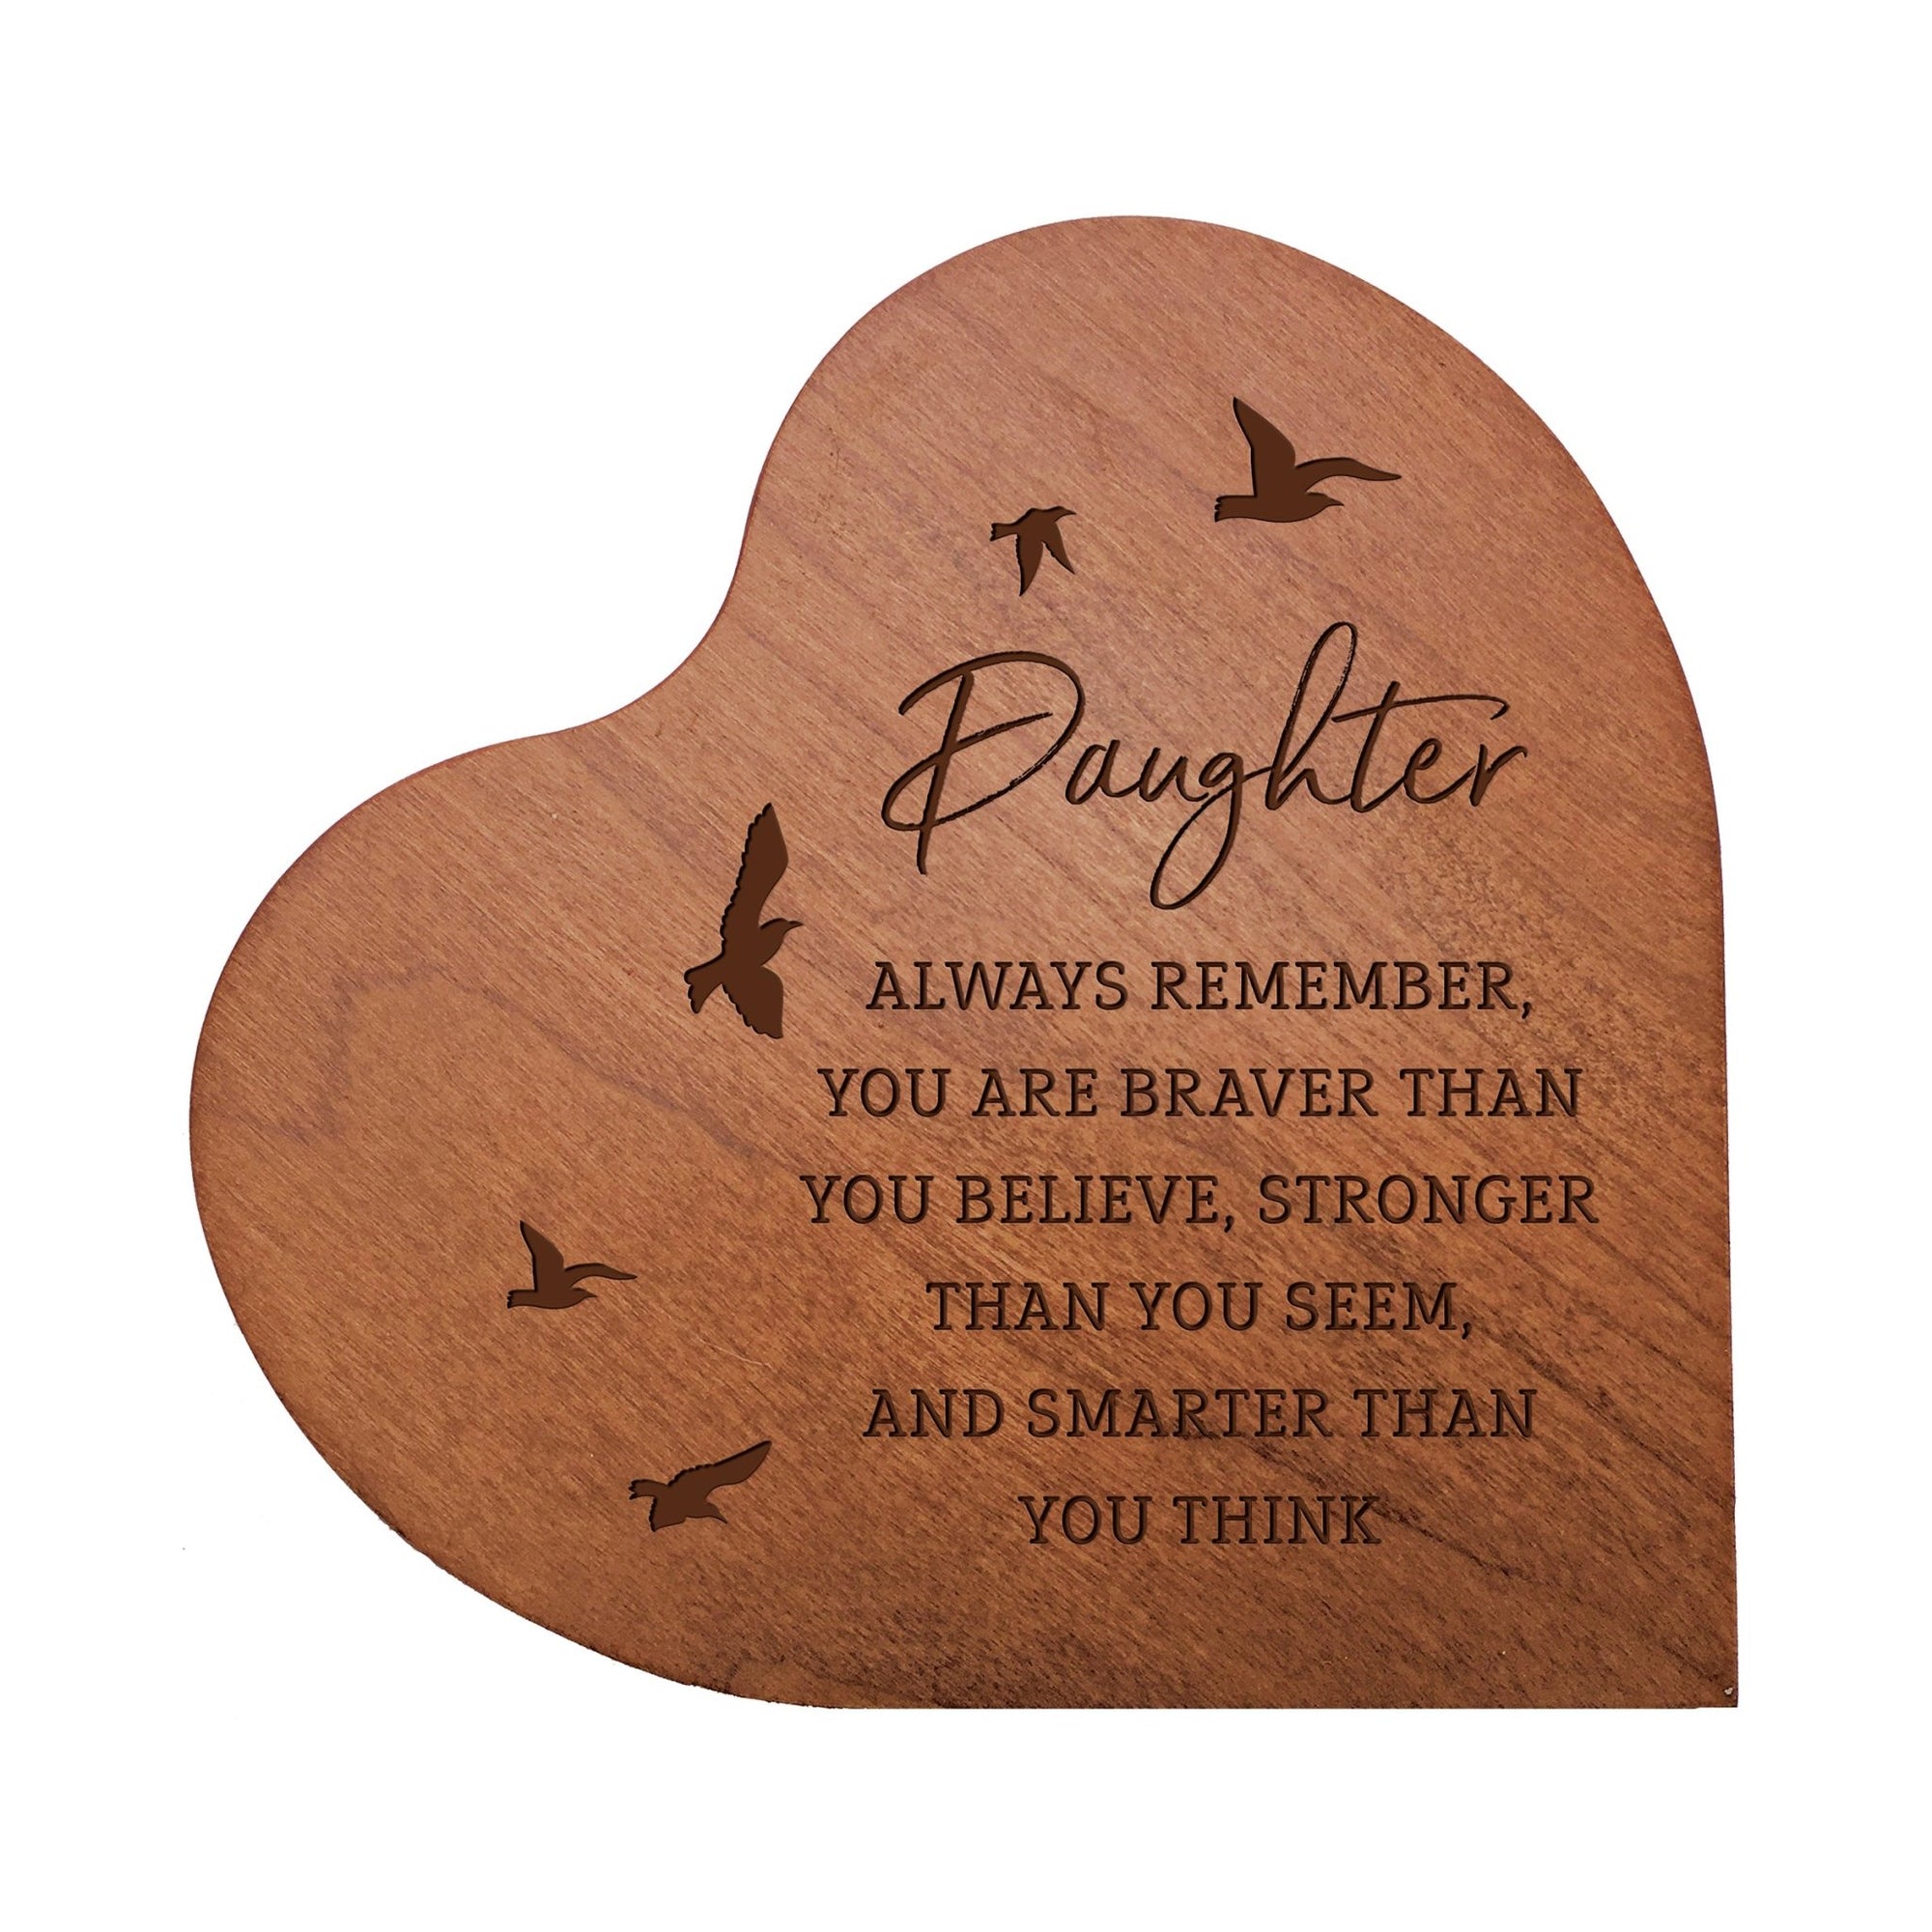 Modern Daughter’s Love Solid Wood Heart Decoration With Inspirational Verse Keepsake Gift 5x5.25 - Daughter Always Remember = Smarter Than You Think - LifeSong Milestones